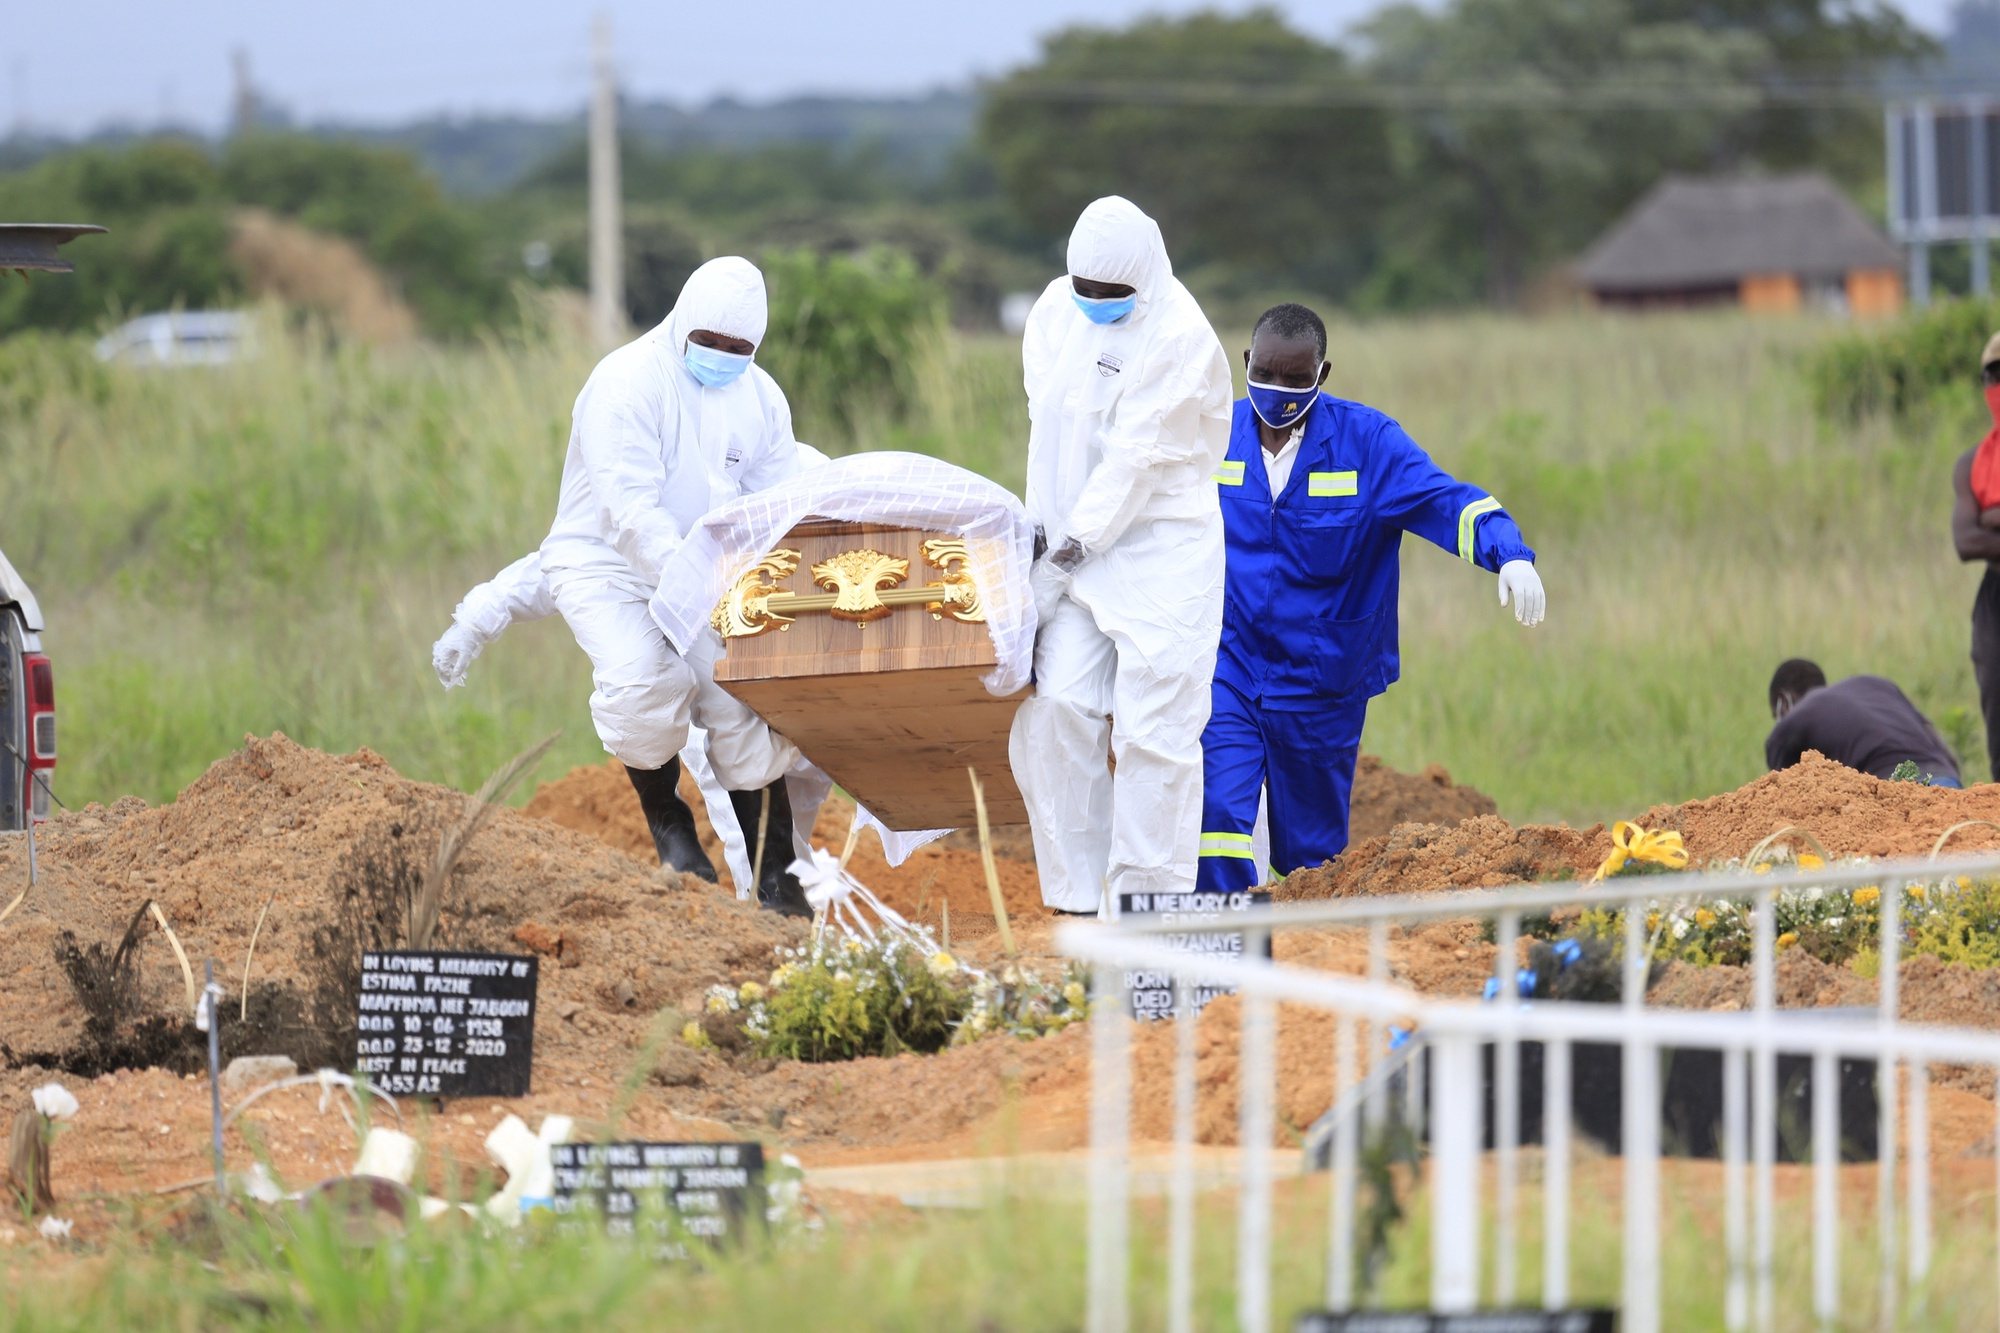 epa08946394 Funeral parlour workers wearing protective gear carry a casket to the grave of  a covid -19 victim at Zororo Memorial Park, in Chitungwiza, Zimbabwe, 18 January 2021. The country has seen an increase in the number of coronavirus related deaths with an average of 250 fatalities per week since December 2020.











.  EPA/AARON UFUMELI